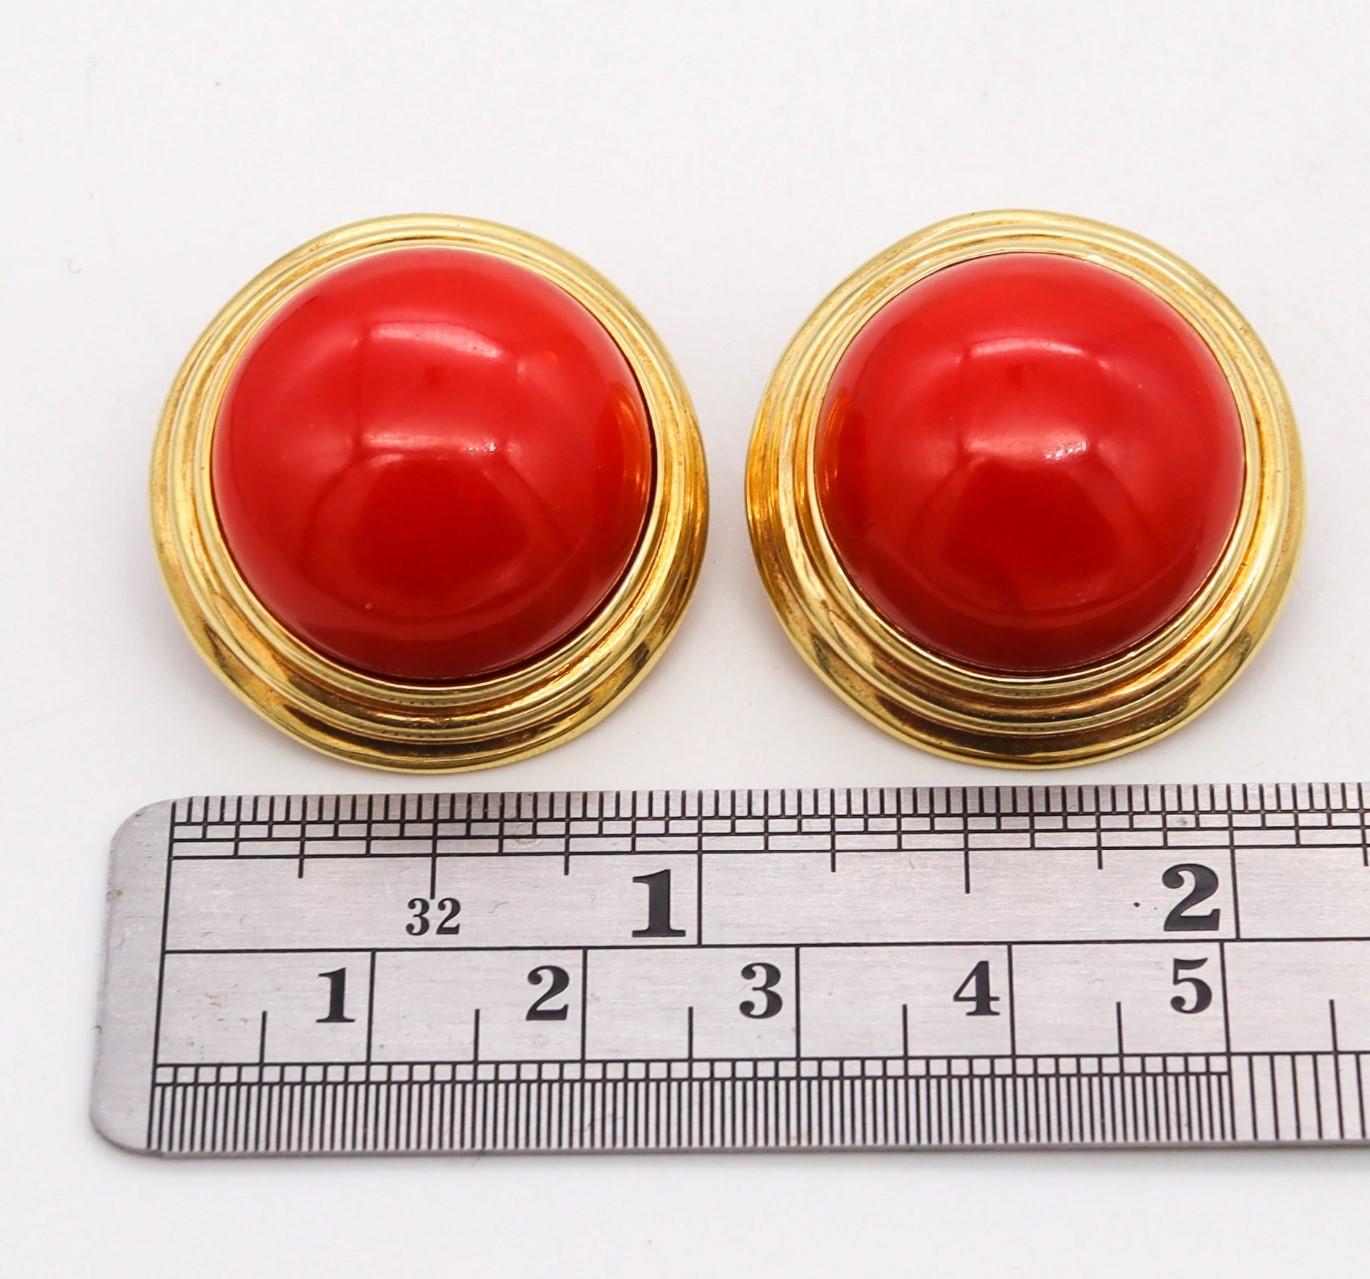 Cellino 1970 Italy Massive Earrings in 18Kt Gold 70.2 Ctw Sardinian Red Coral For Sale 3